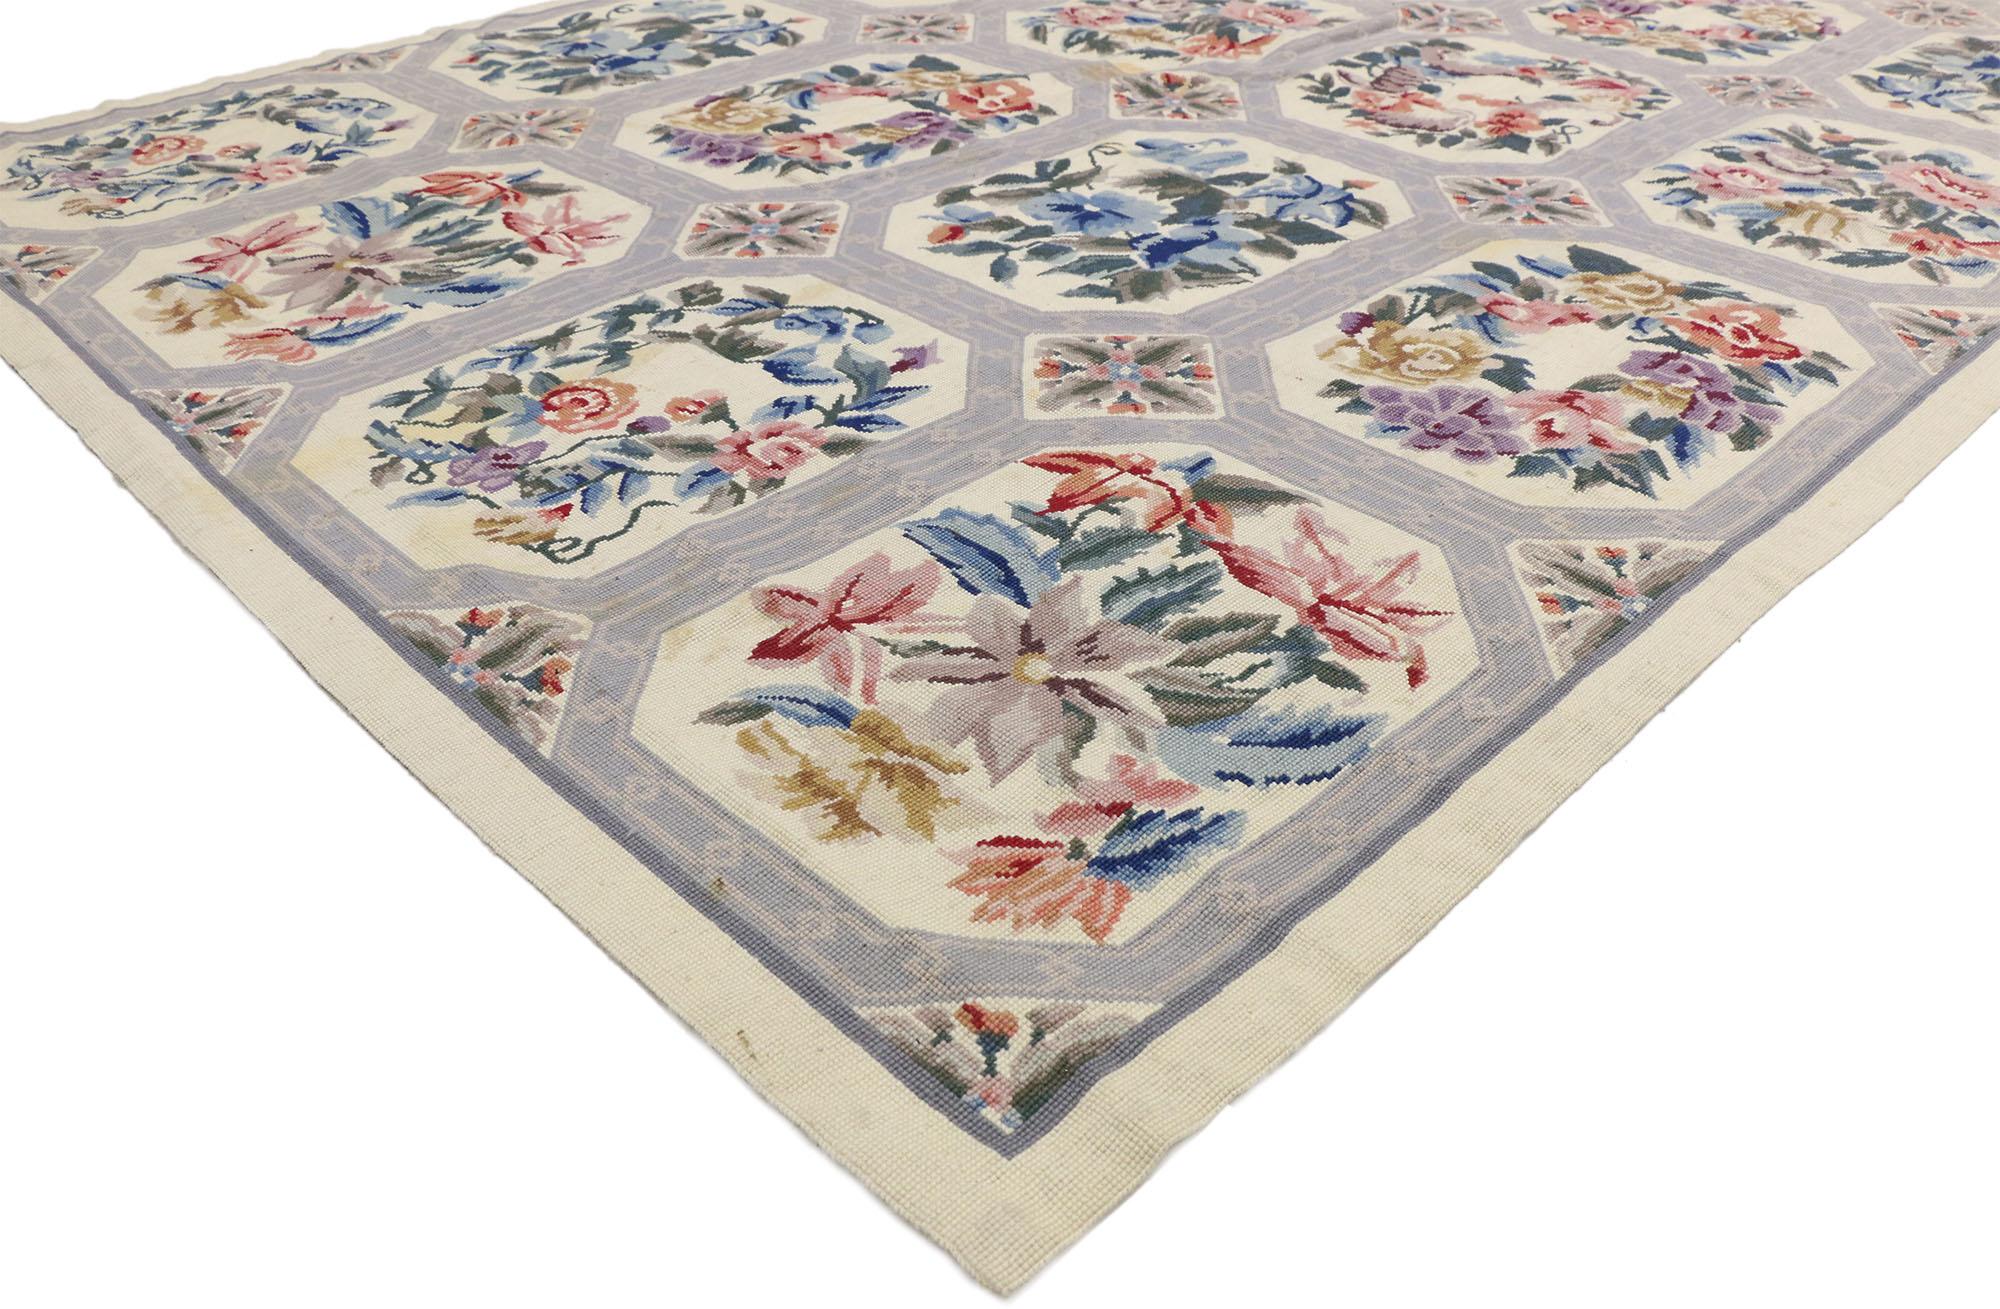 77206 vintage Chinese floral needlepoint rug with French Country style. Various flower species grace the windows of an all-over compartment style lattice pattern in this vintage Chinese floral needlepoint rug with French Country style. Disarming and